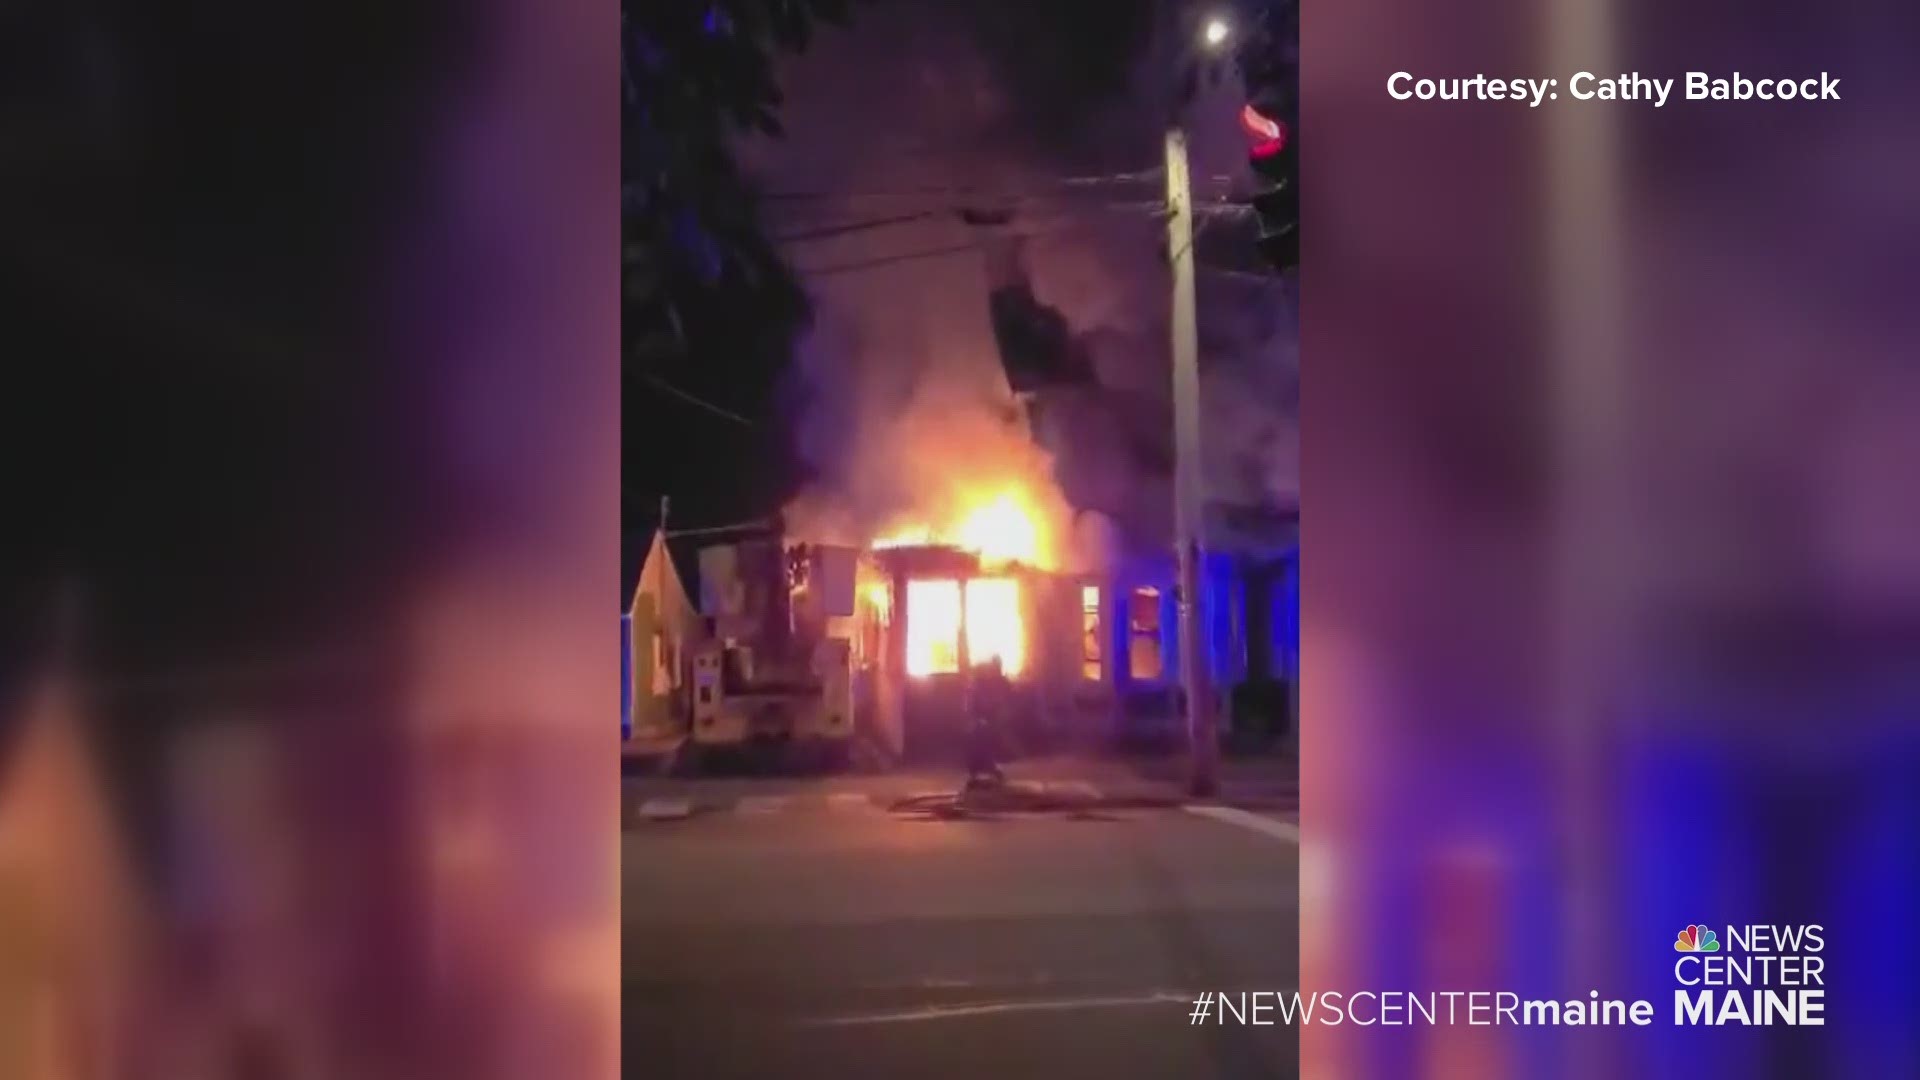 This video was sent to us by Cathy Babcock. Her son is a firefighter on the scene.